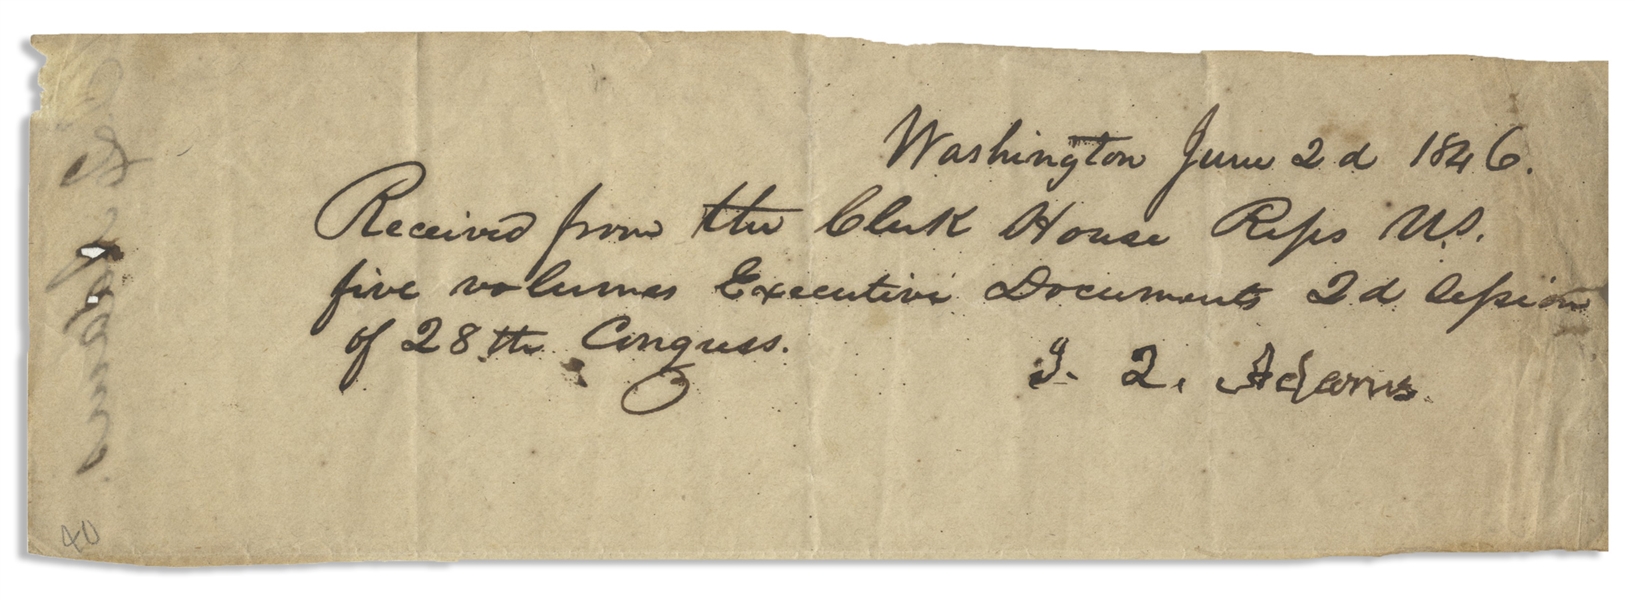 John Quincy Adams Note Signed Related to the 28th Congress